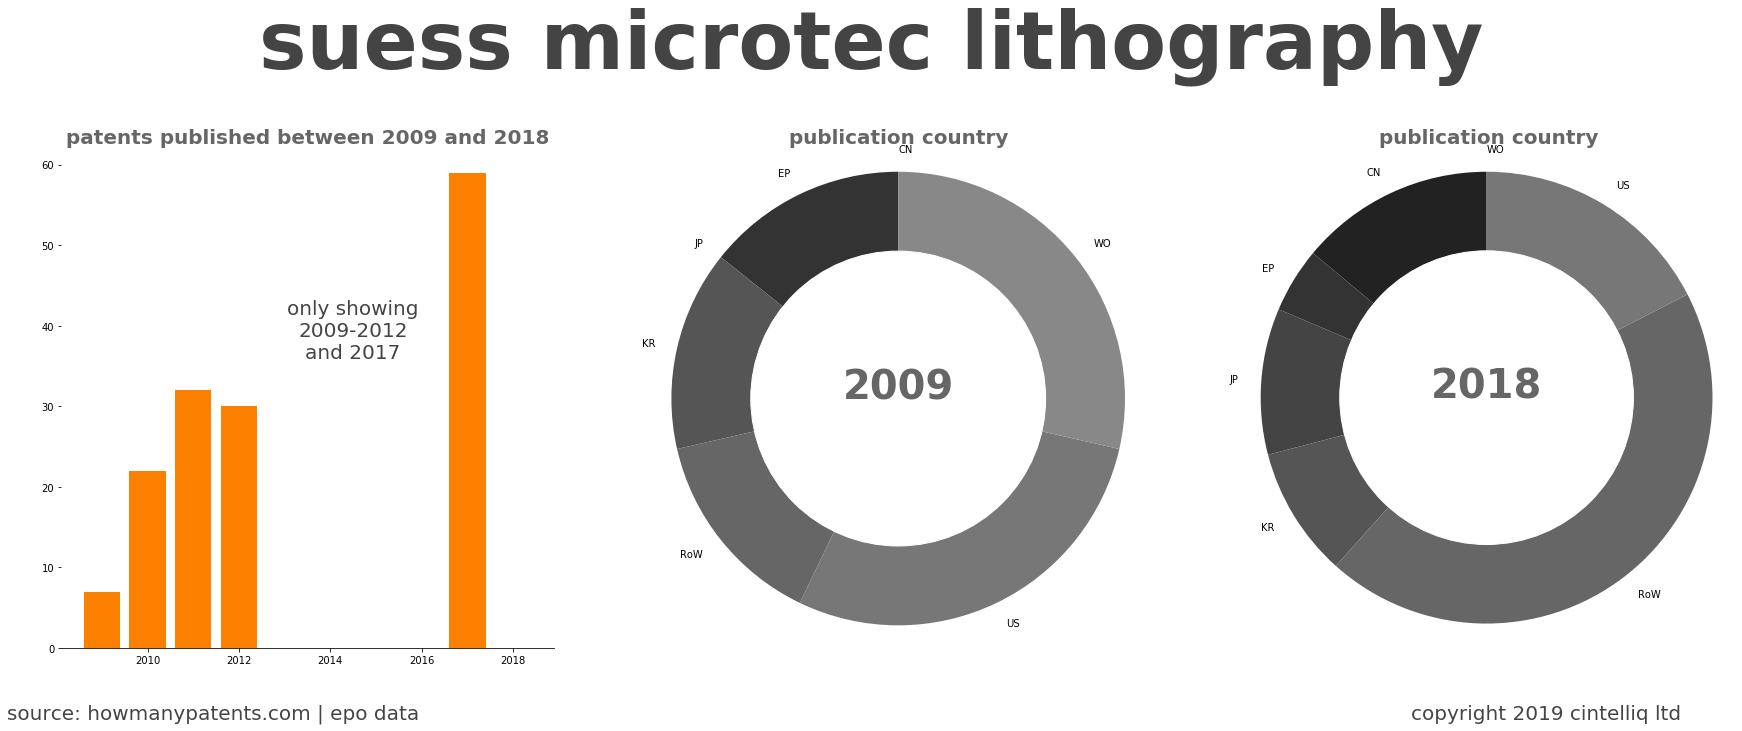 summary of patents for Suess Microtec Lithography